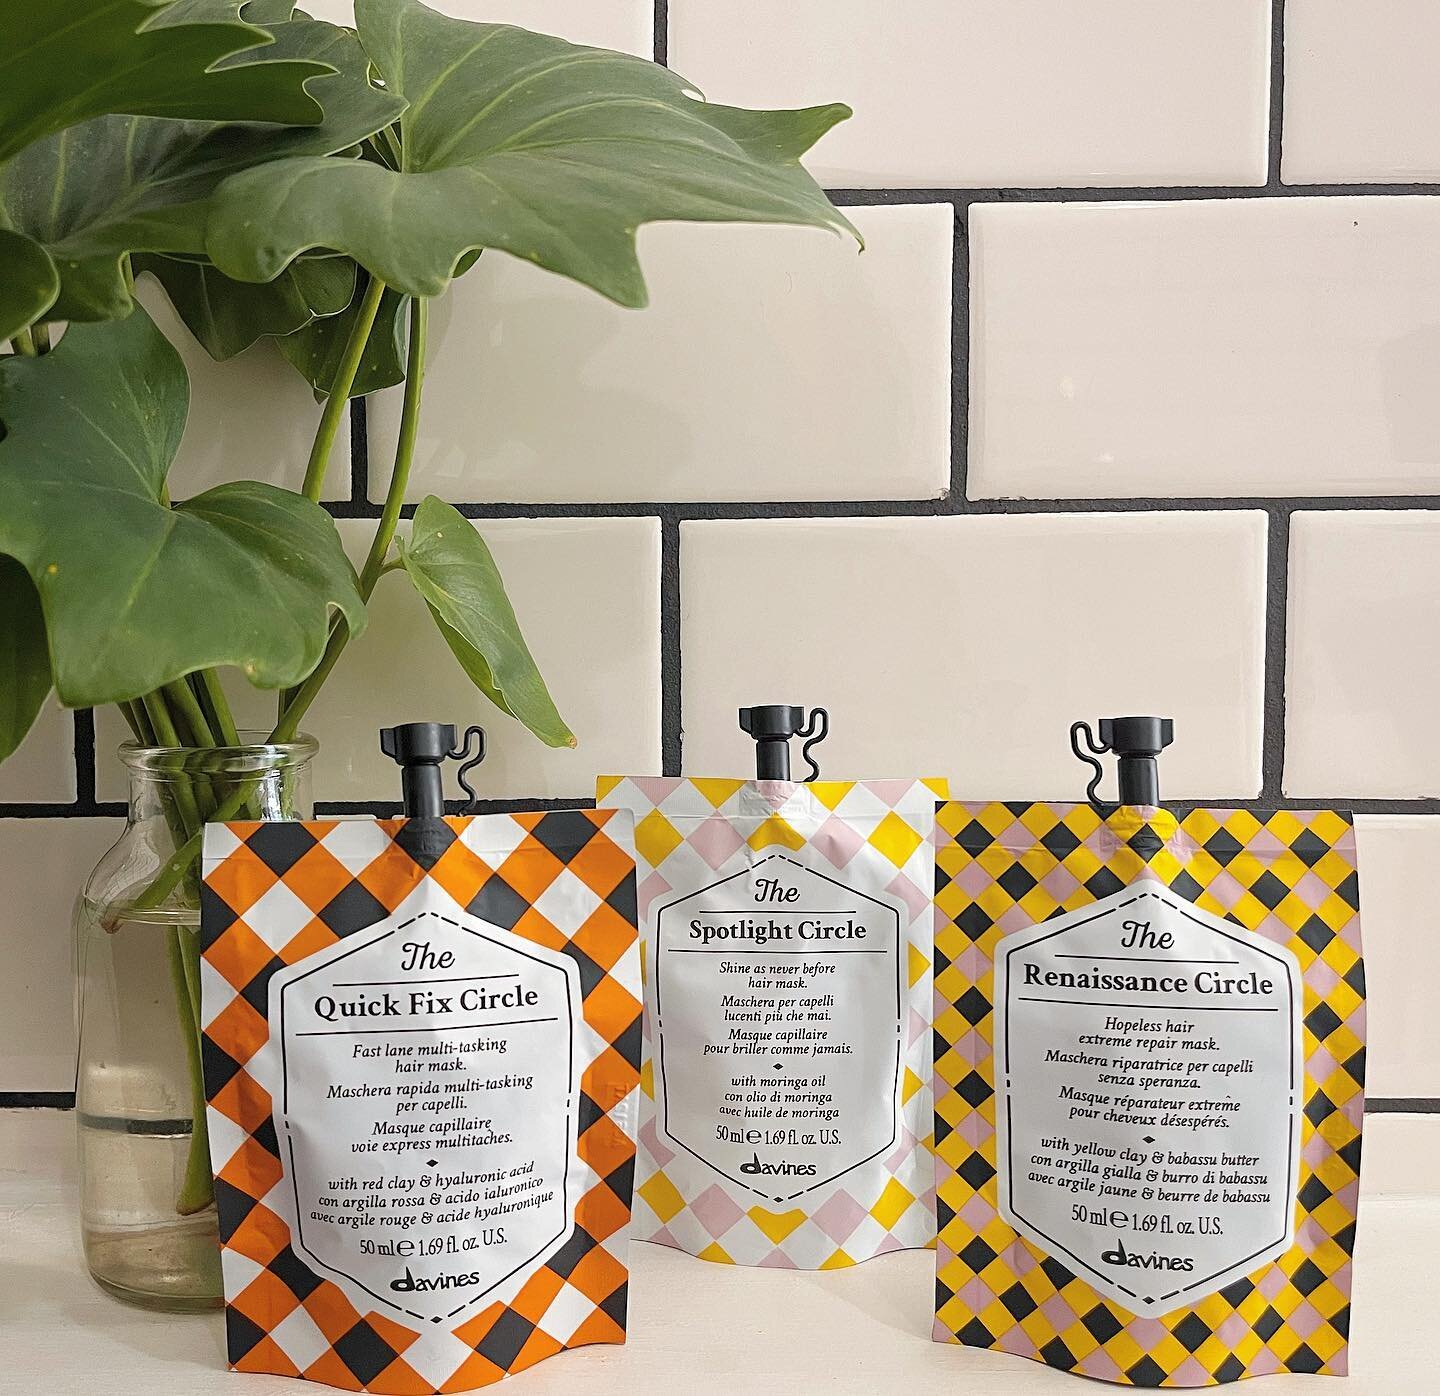 Get a free Clay hair mask when you purchase 2 Davines products. Swing by soon, this coveted promo won&rsquo;t last long.  #davines #davinessalon #mplshairsalon #mnhairsalon #davinescirclechronicles